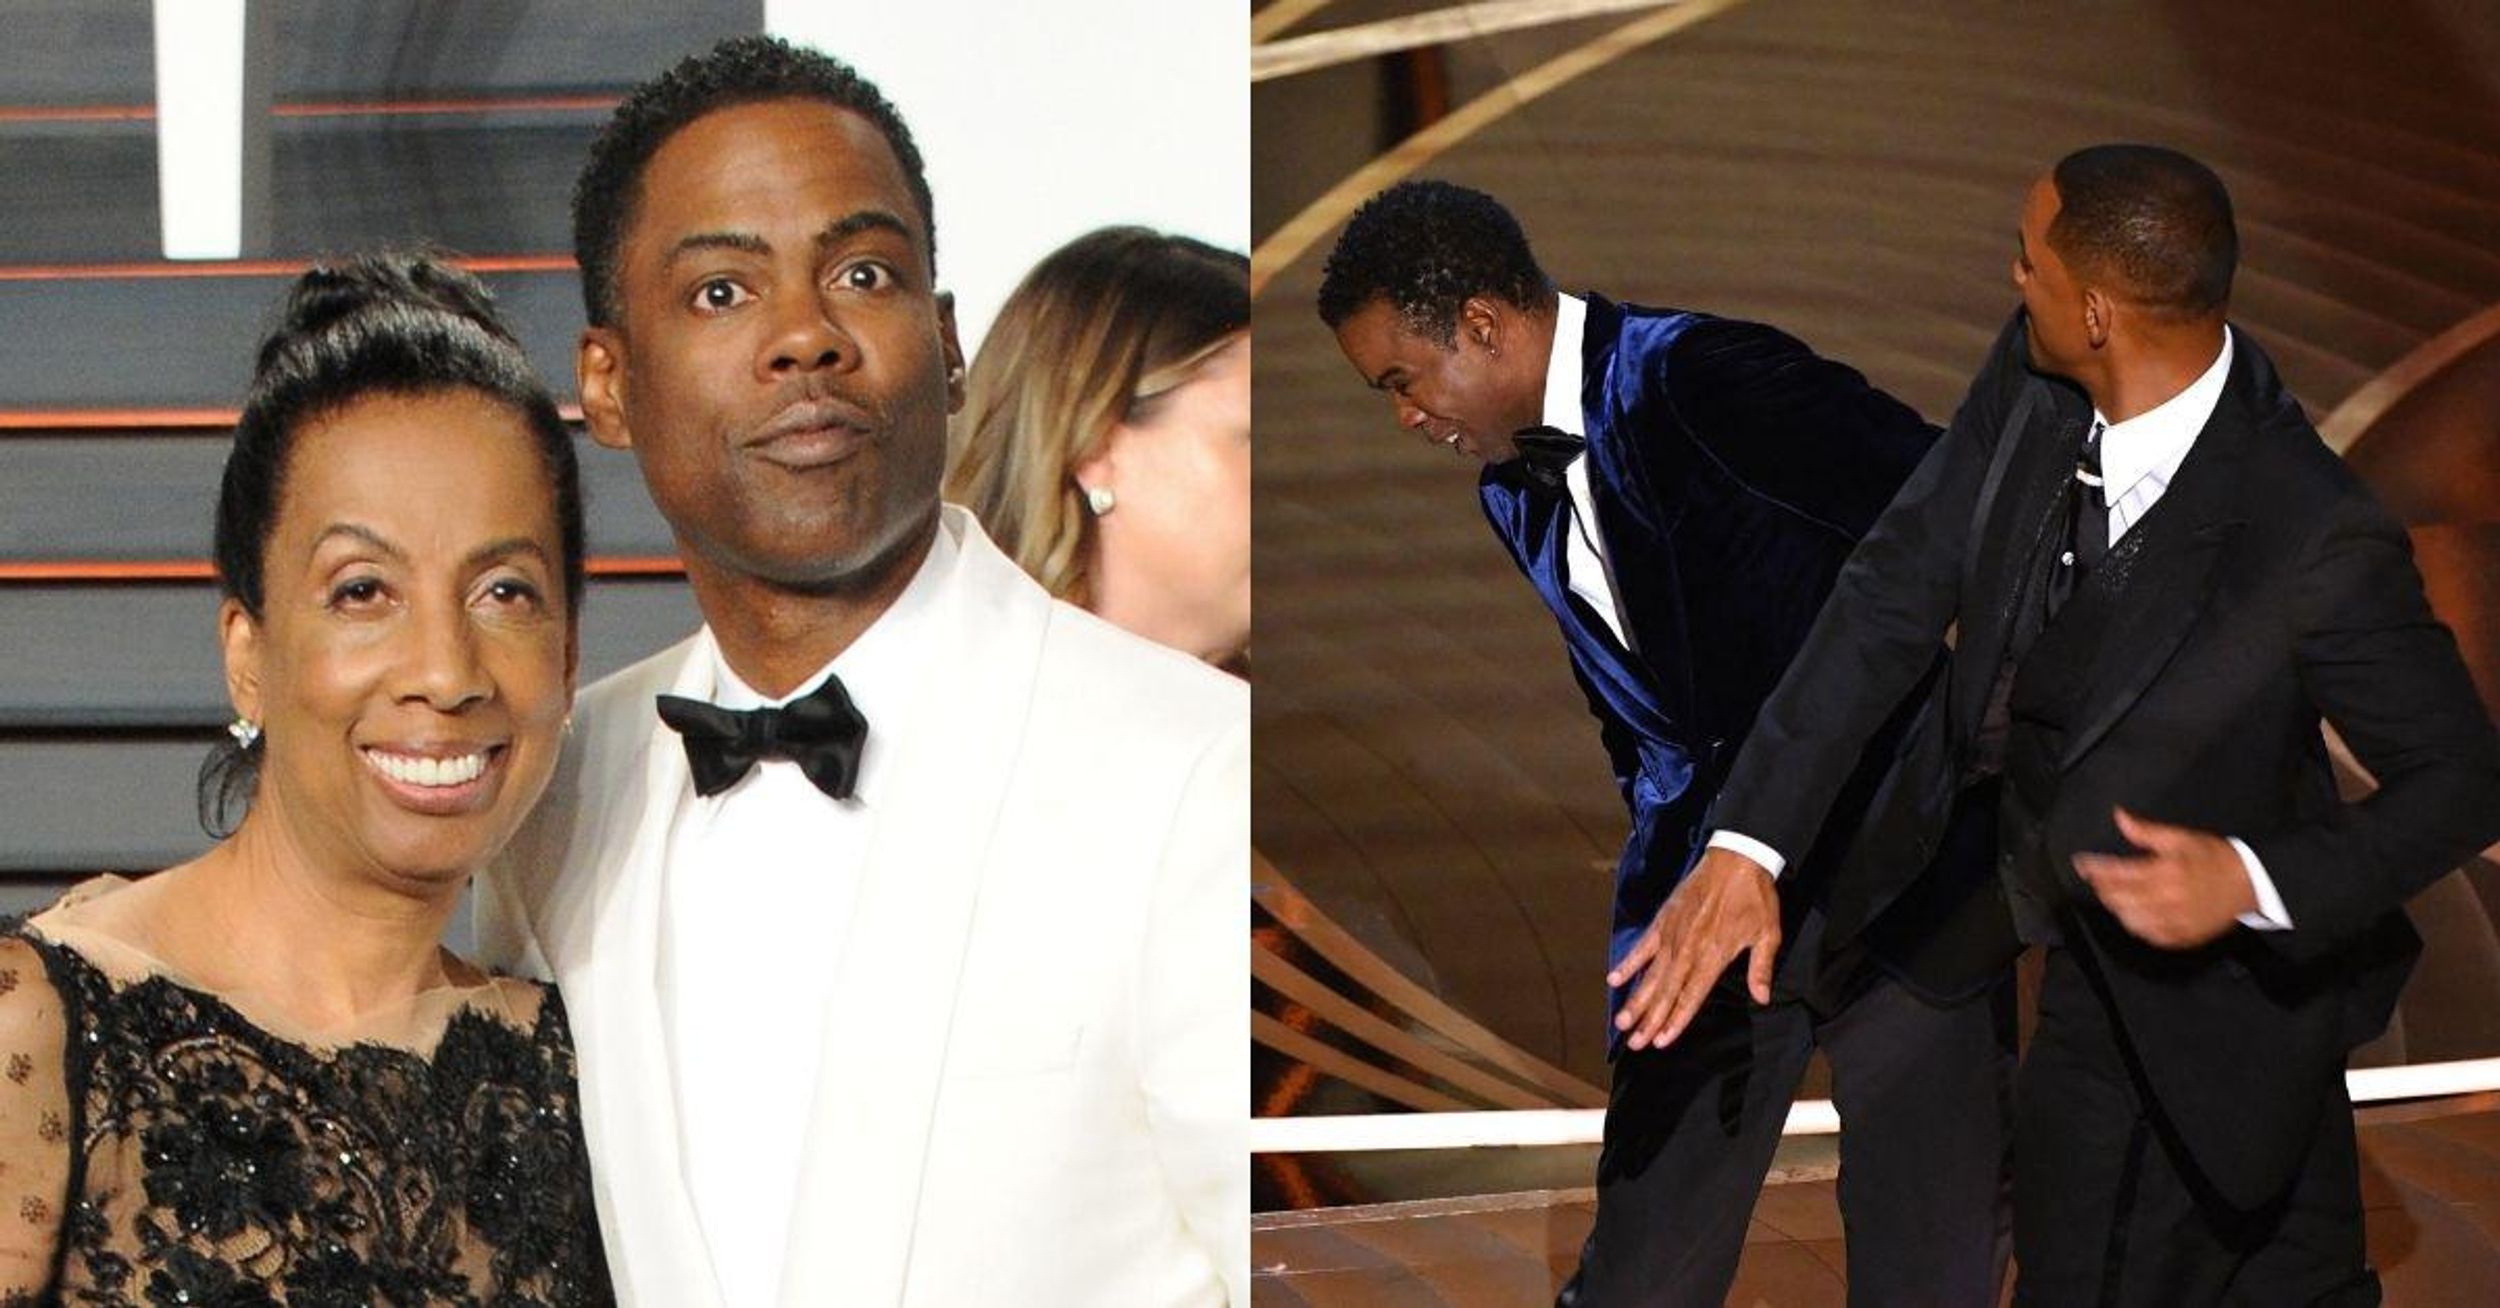 Chris Rock's Mom Has Some Tough Words For Will Smith After He Slapped Her Son At The Oscars